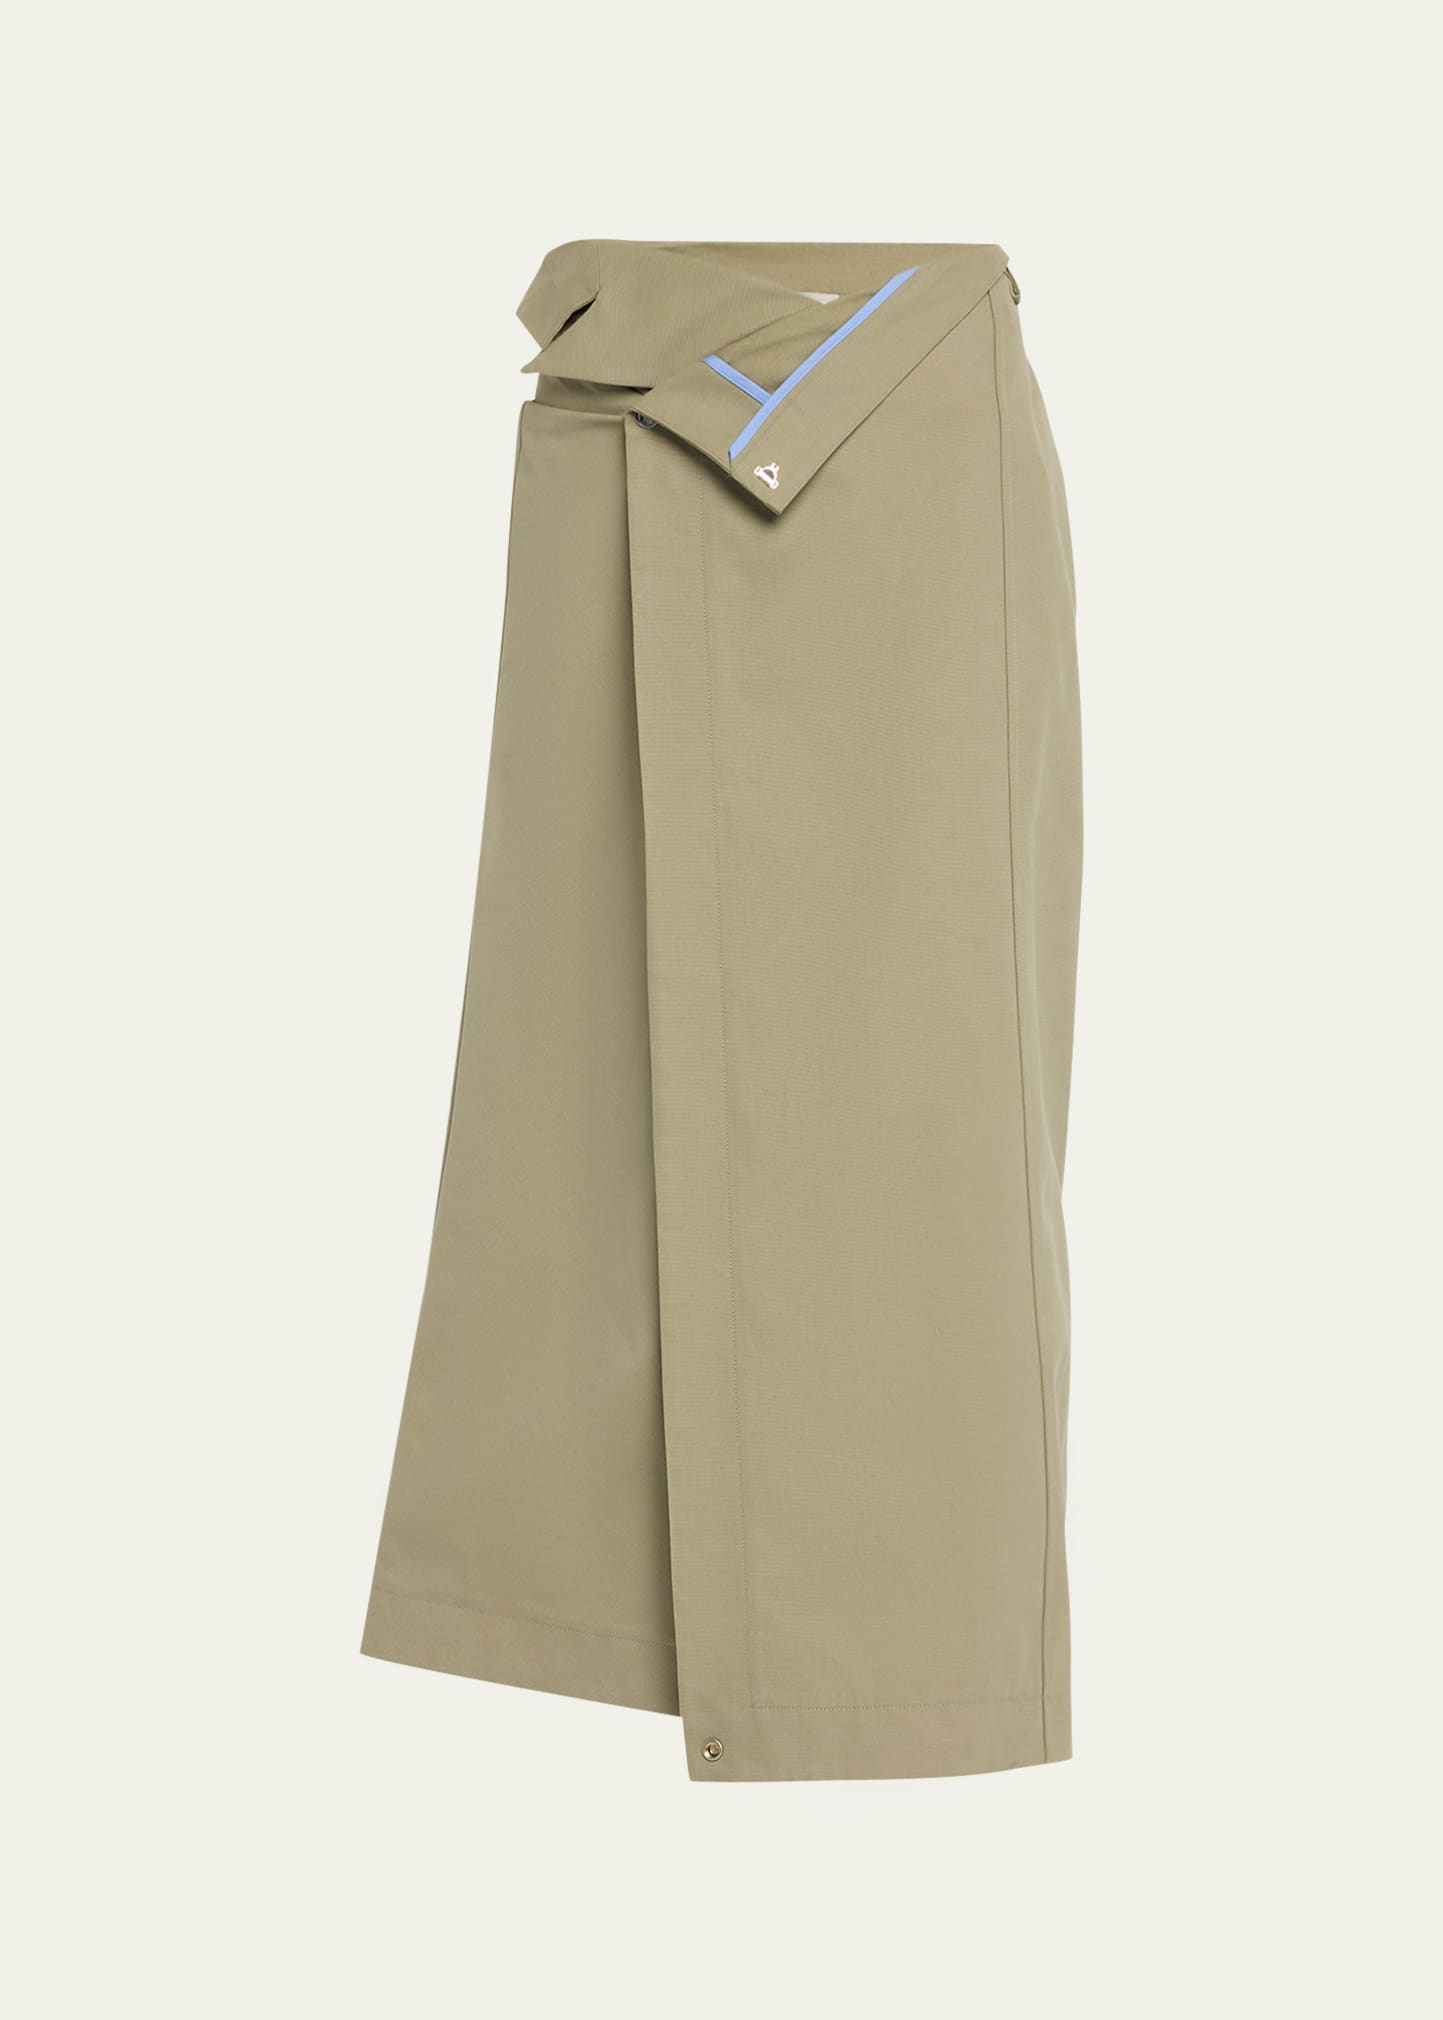 Maxi Belted Wrap Skirt (Green)